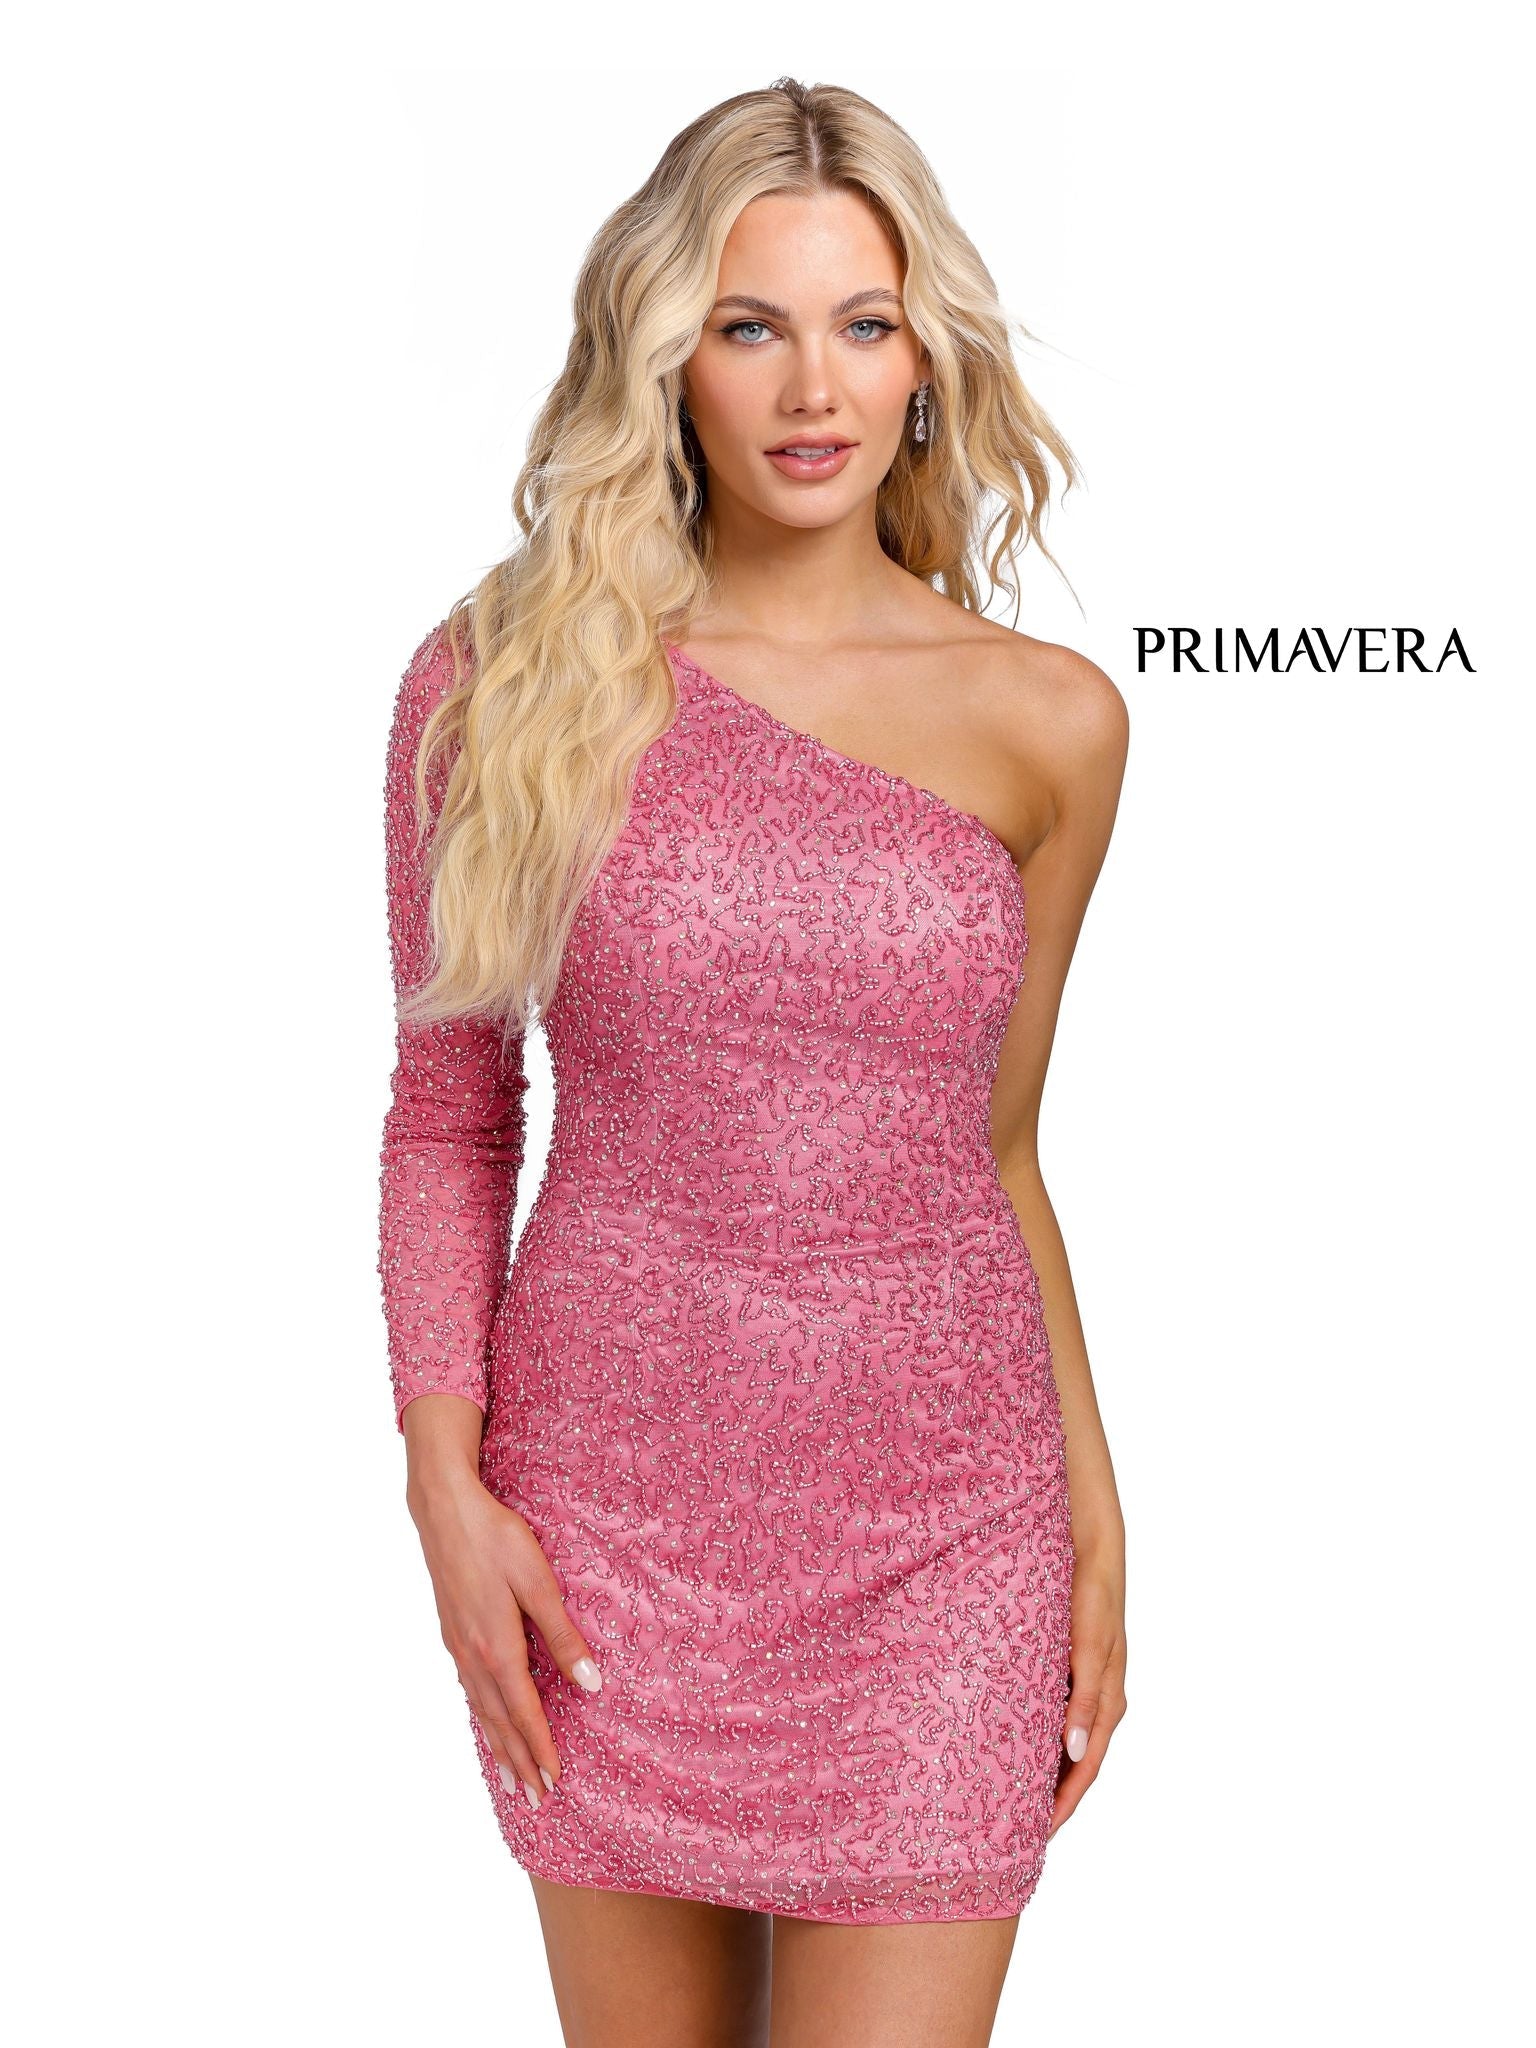 Primavera Couture 3849 Short 2022 Homecoming dress Fitted sequin beaded short cocktail dress with one long sleeve asymmetrical one shoulder style.  It is fitted and sparkles with every turn due to bugle beading.   Available Colors- Lilac, Mint, Rose Pink